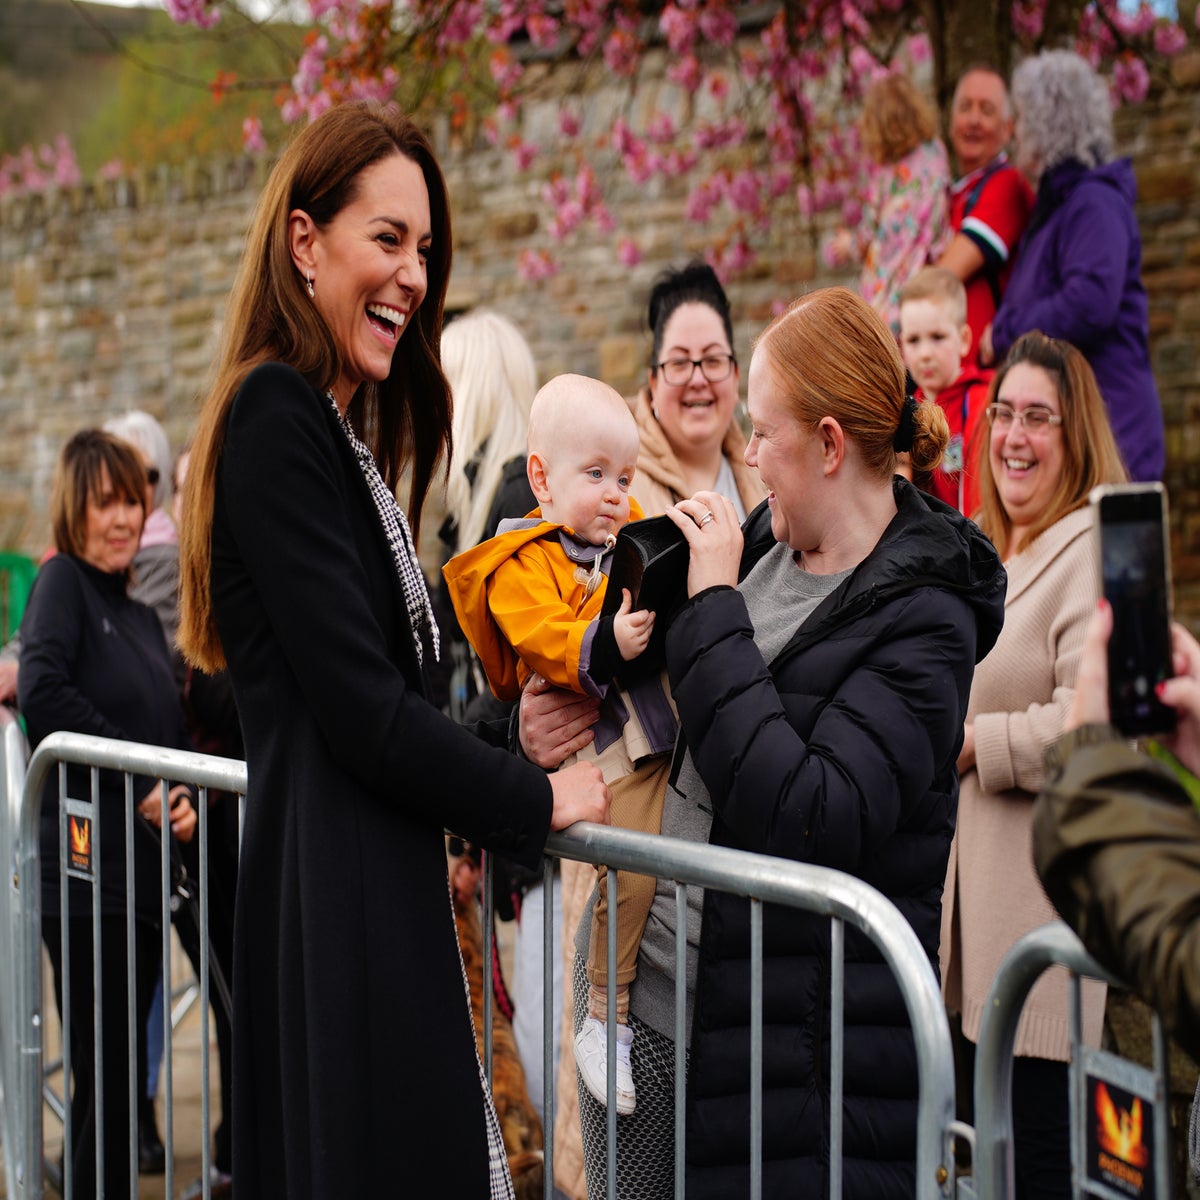 Video captures moment Kate Middleton lets baby play with her $845 handbag